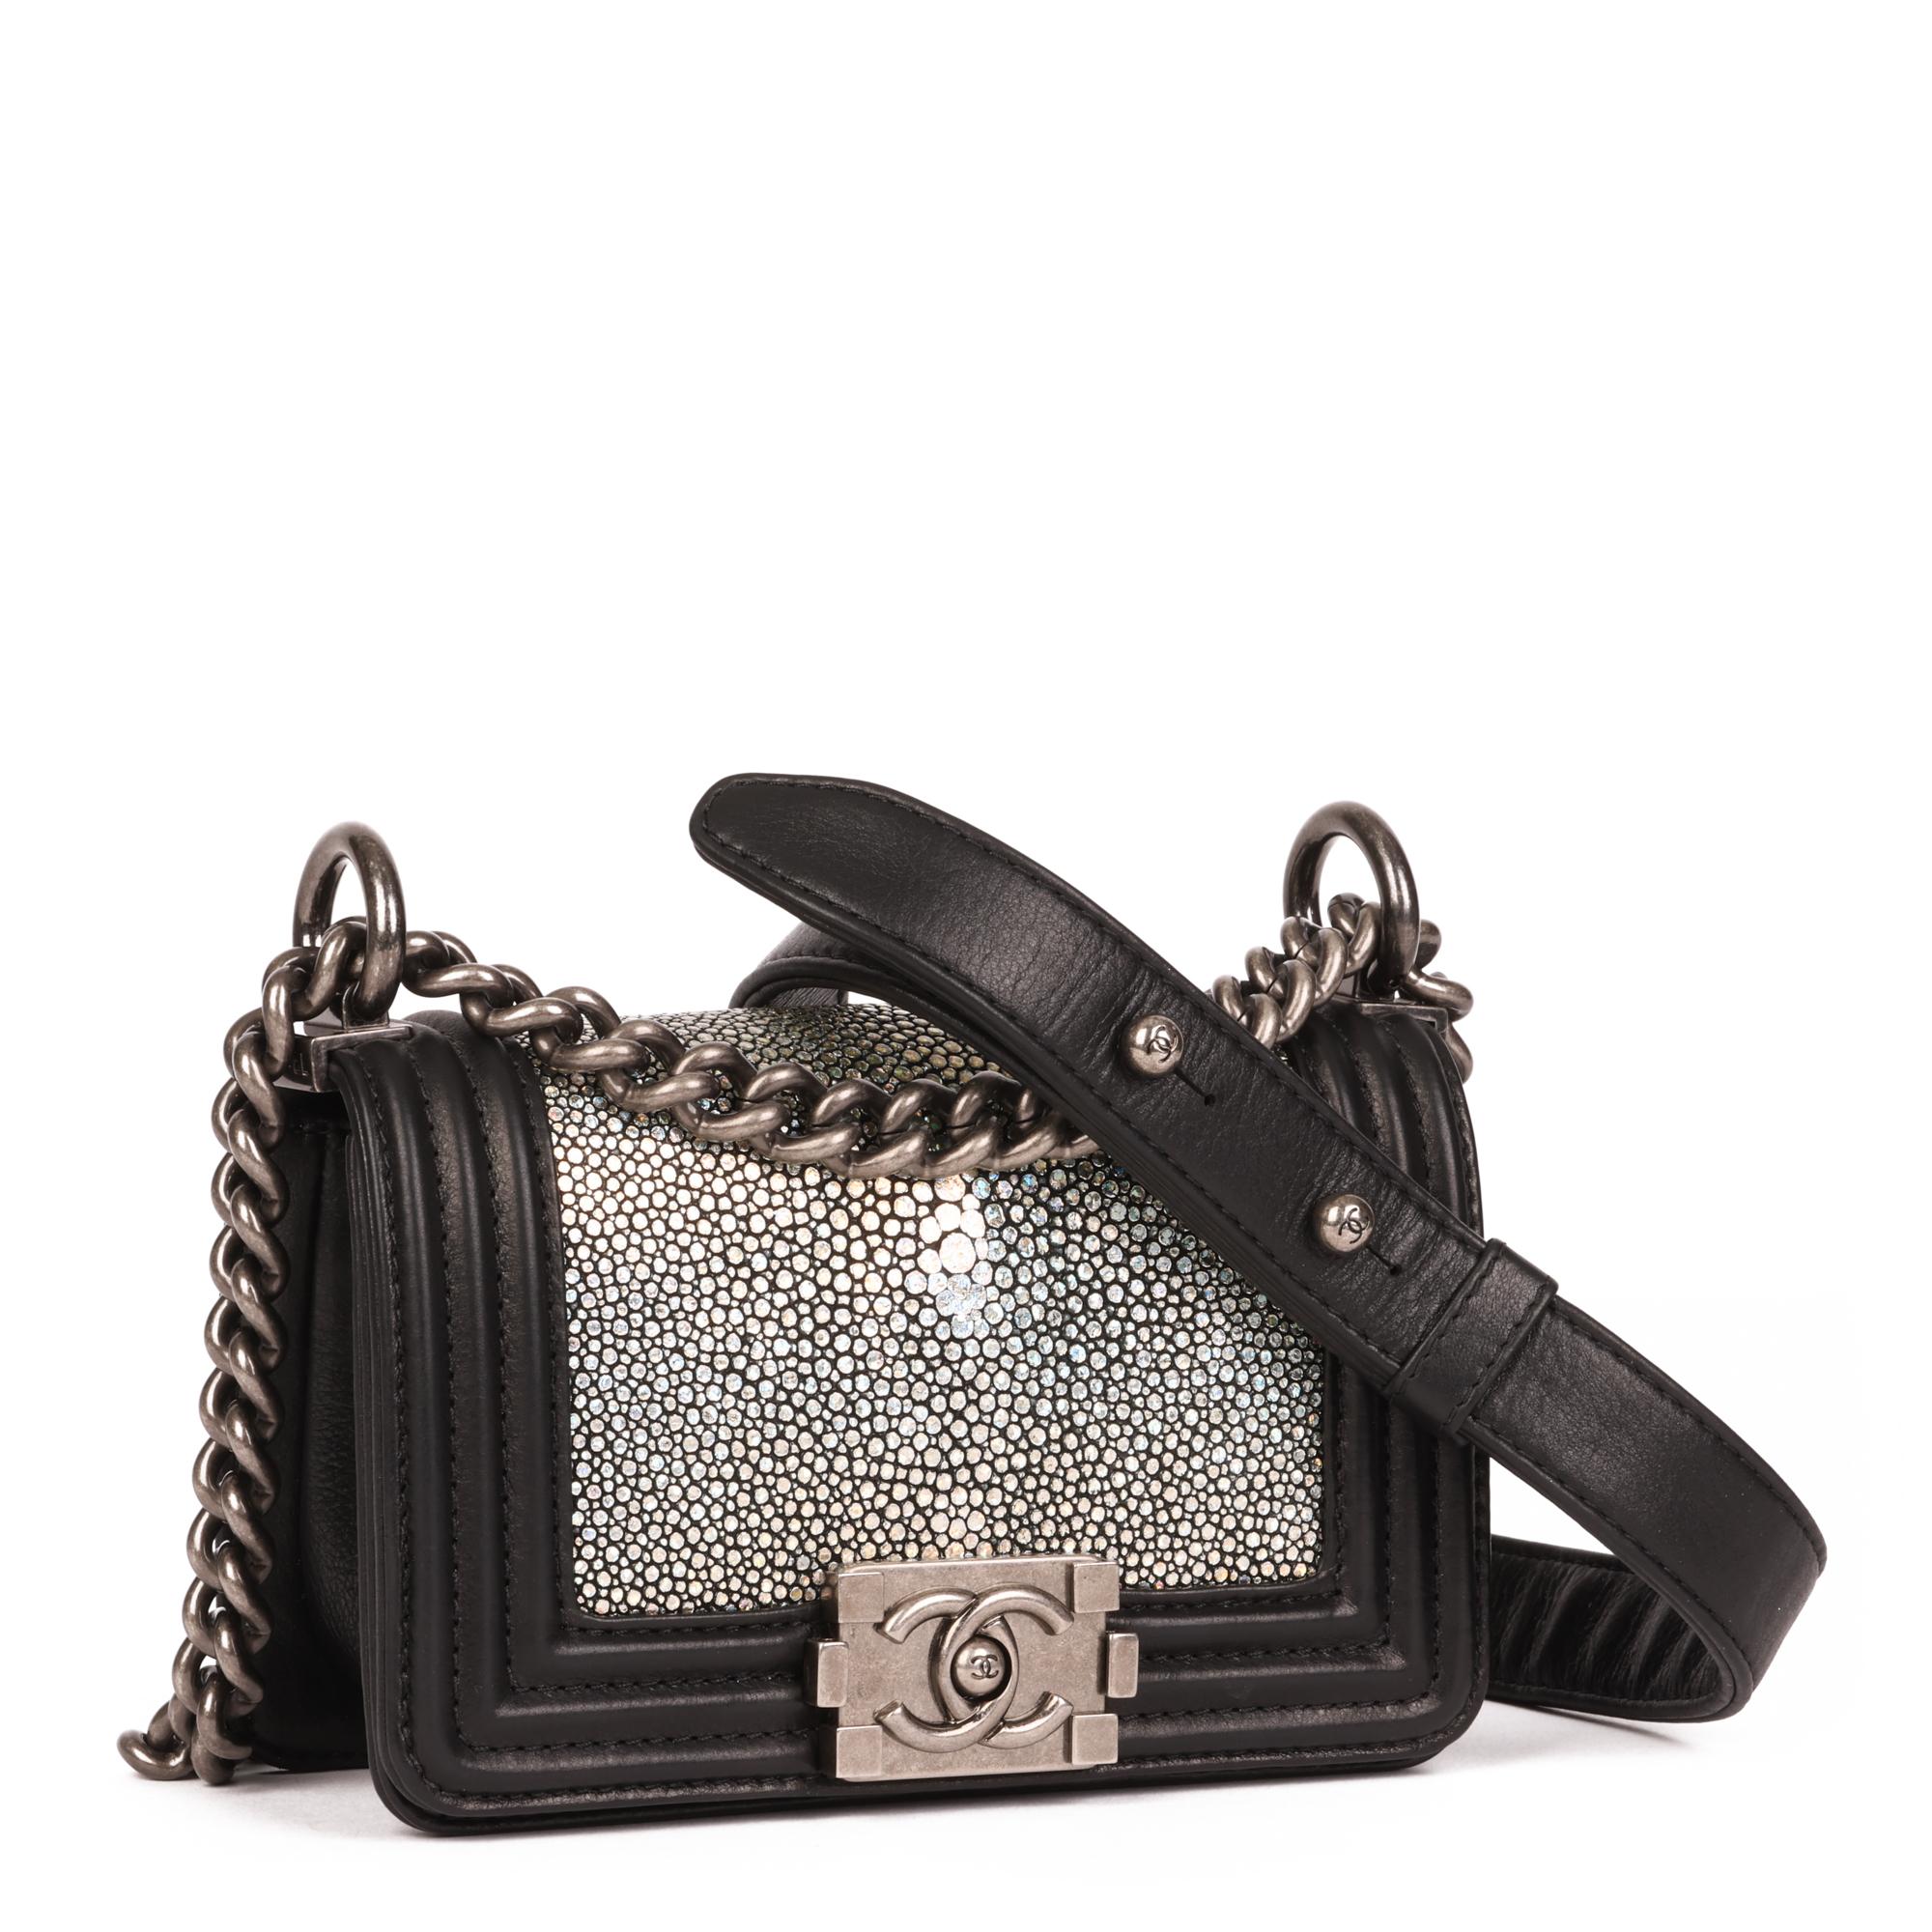 CHANEL
Black Lambskin & Hologram Galuchat Micro Le Boy

Serial Number: 19736185
Age (Circa): 2014
Accompanied By: Chanel Dust Bag
Authenticity Details: Serial Sticker (Made in Italy)
Gender: Ladies
Type: Shoulder, Crossbody

Colour: Black
Hardware: